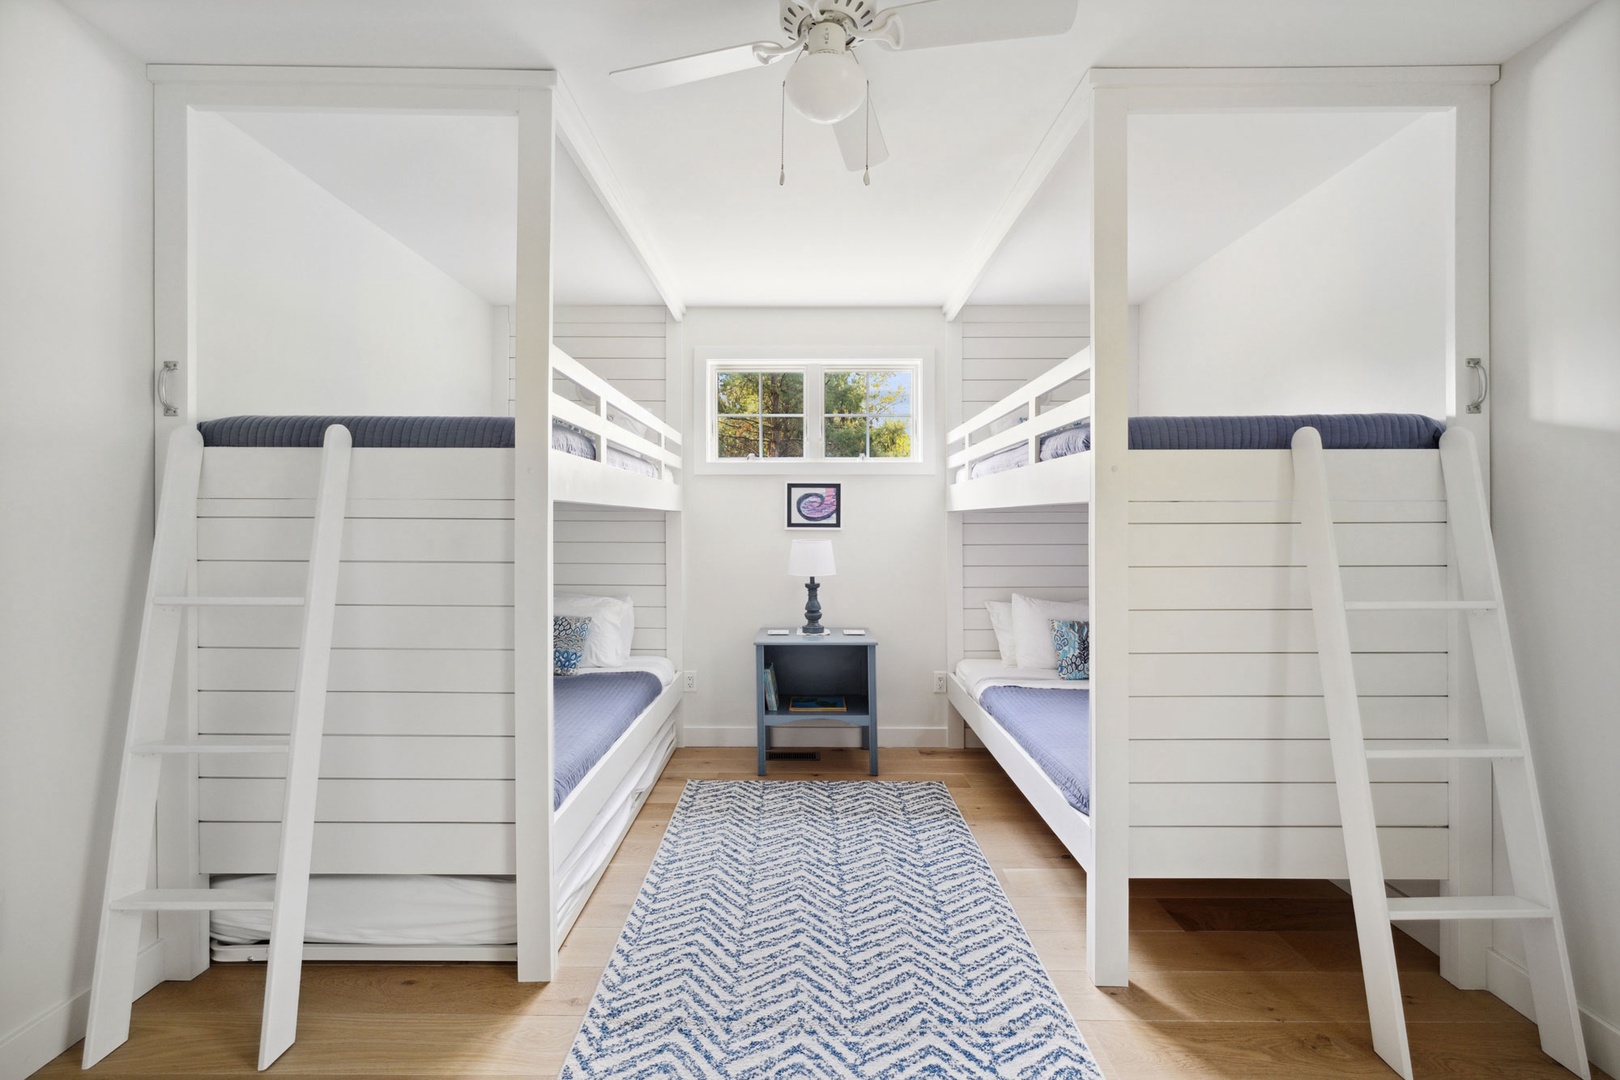 This cozy bunkroom is perfect for kids and adults alike.